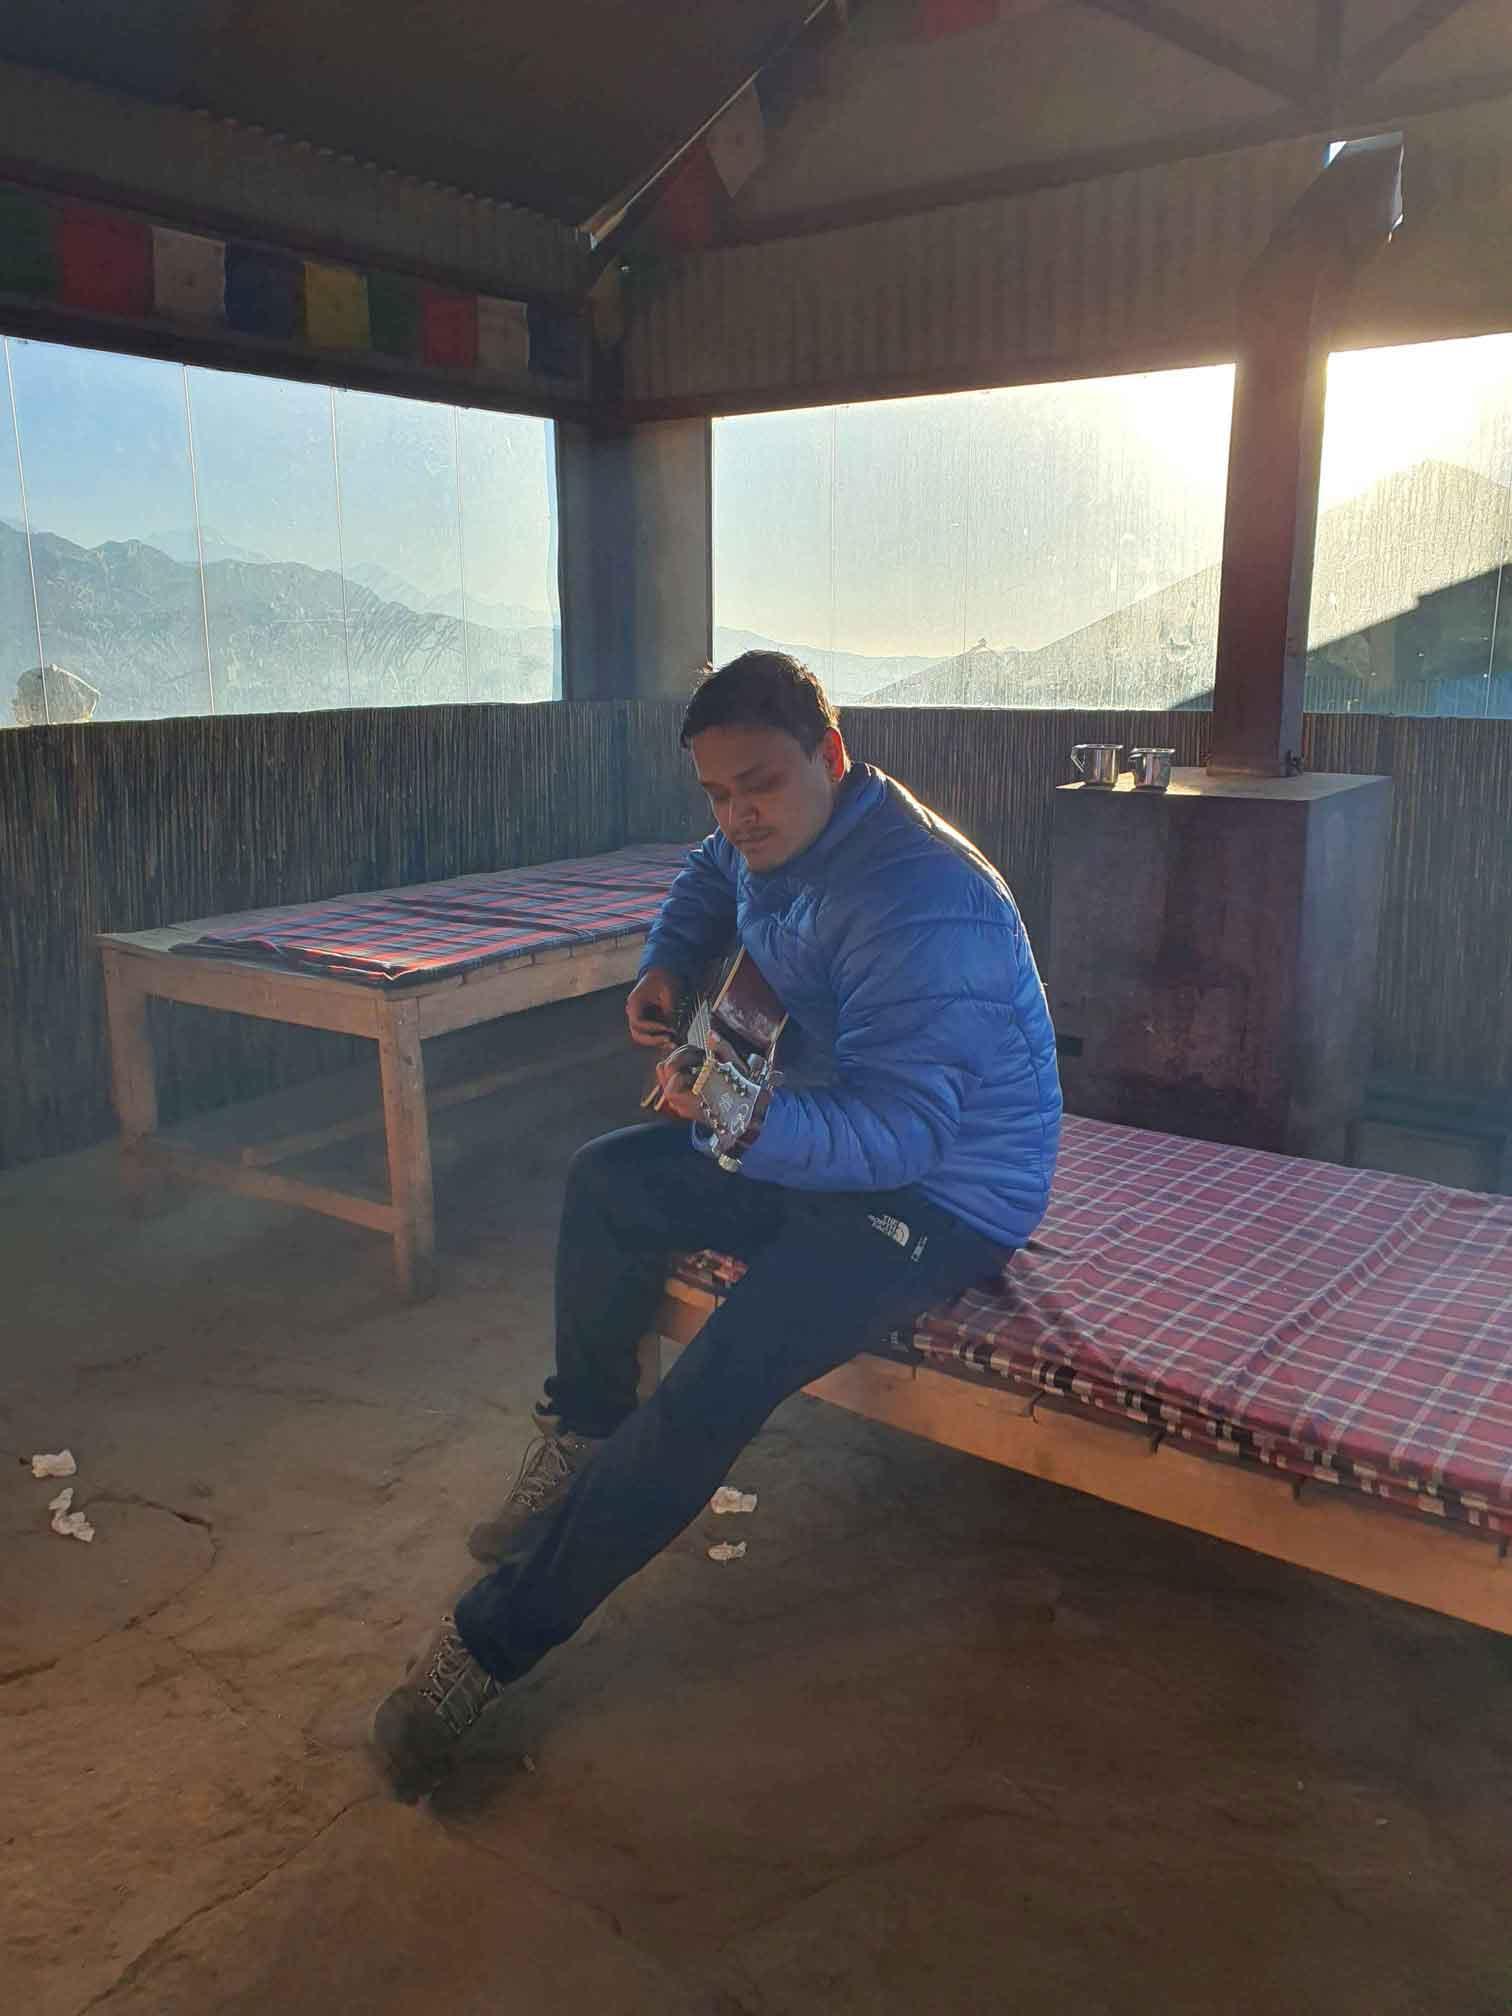 Me trying to get into the mountain vibe with a guitar in Khomai Danda.